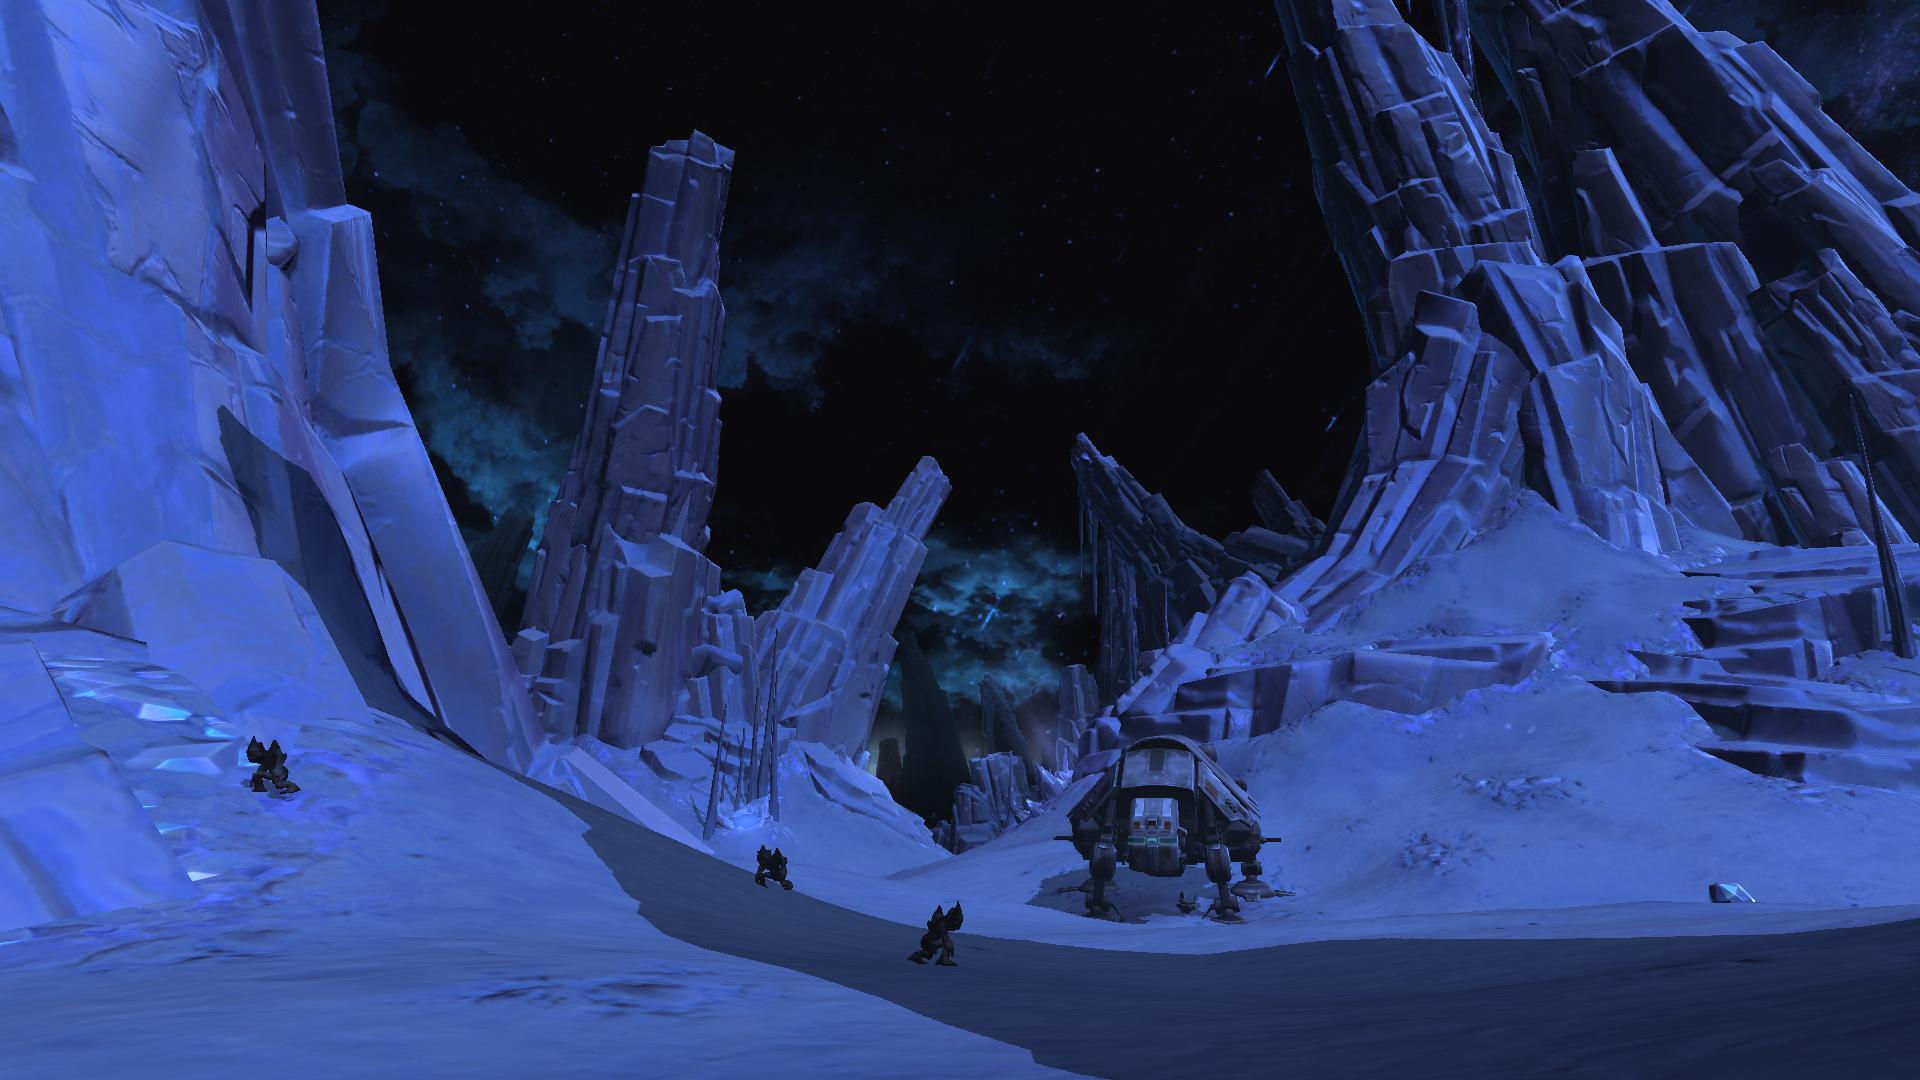 Find The Whole System In Swtor Credits >> HD Wallpaper, get it now!